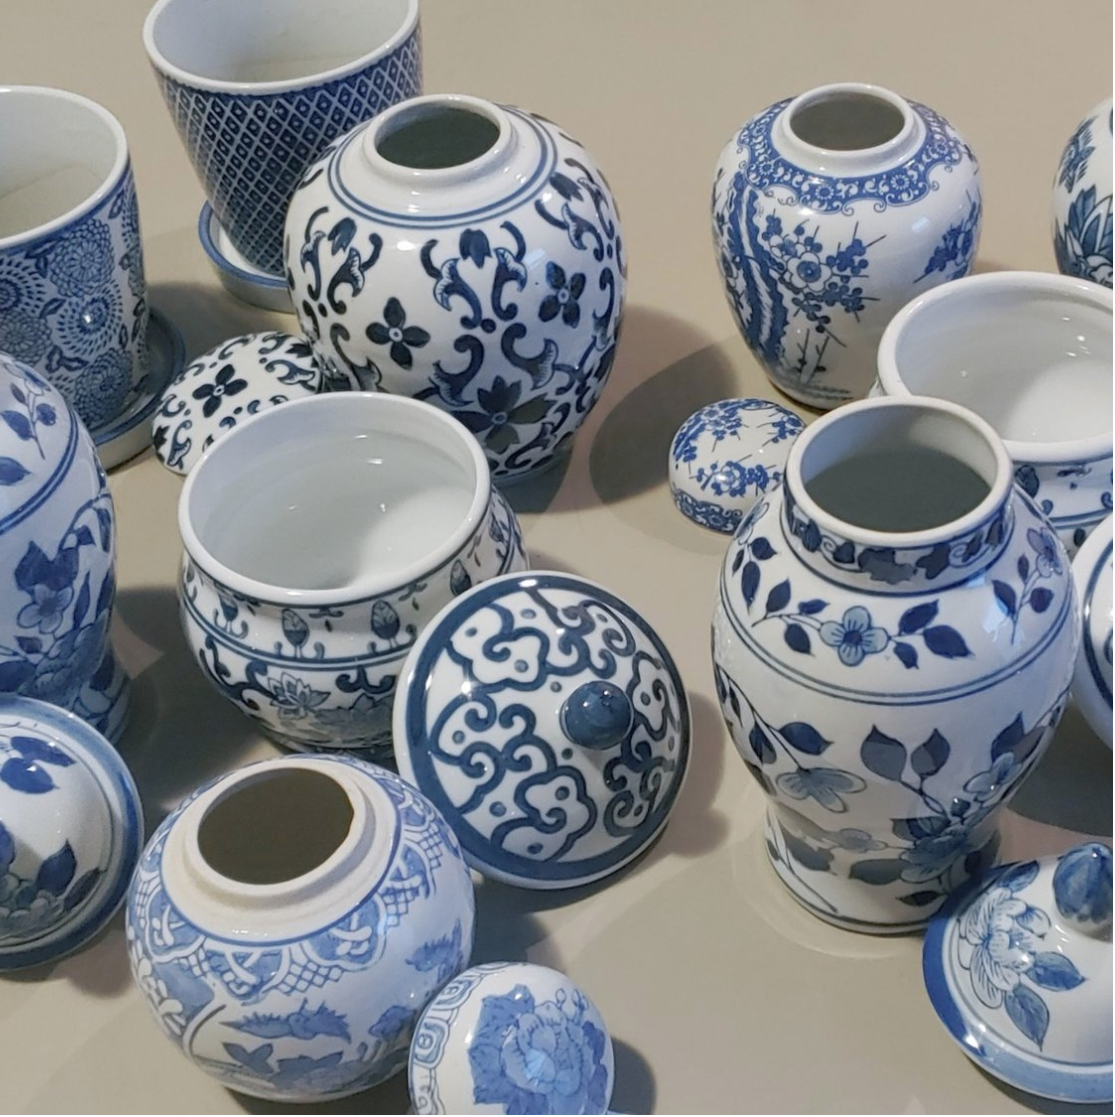  Medium chinoiserie vases for rent from Delicate Dishes 